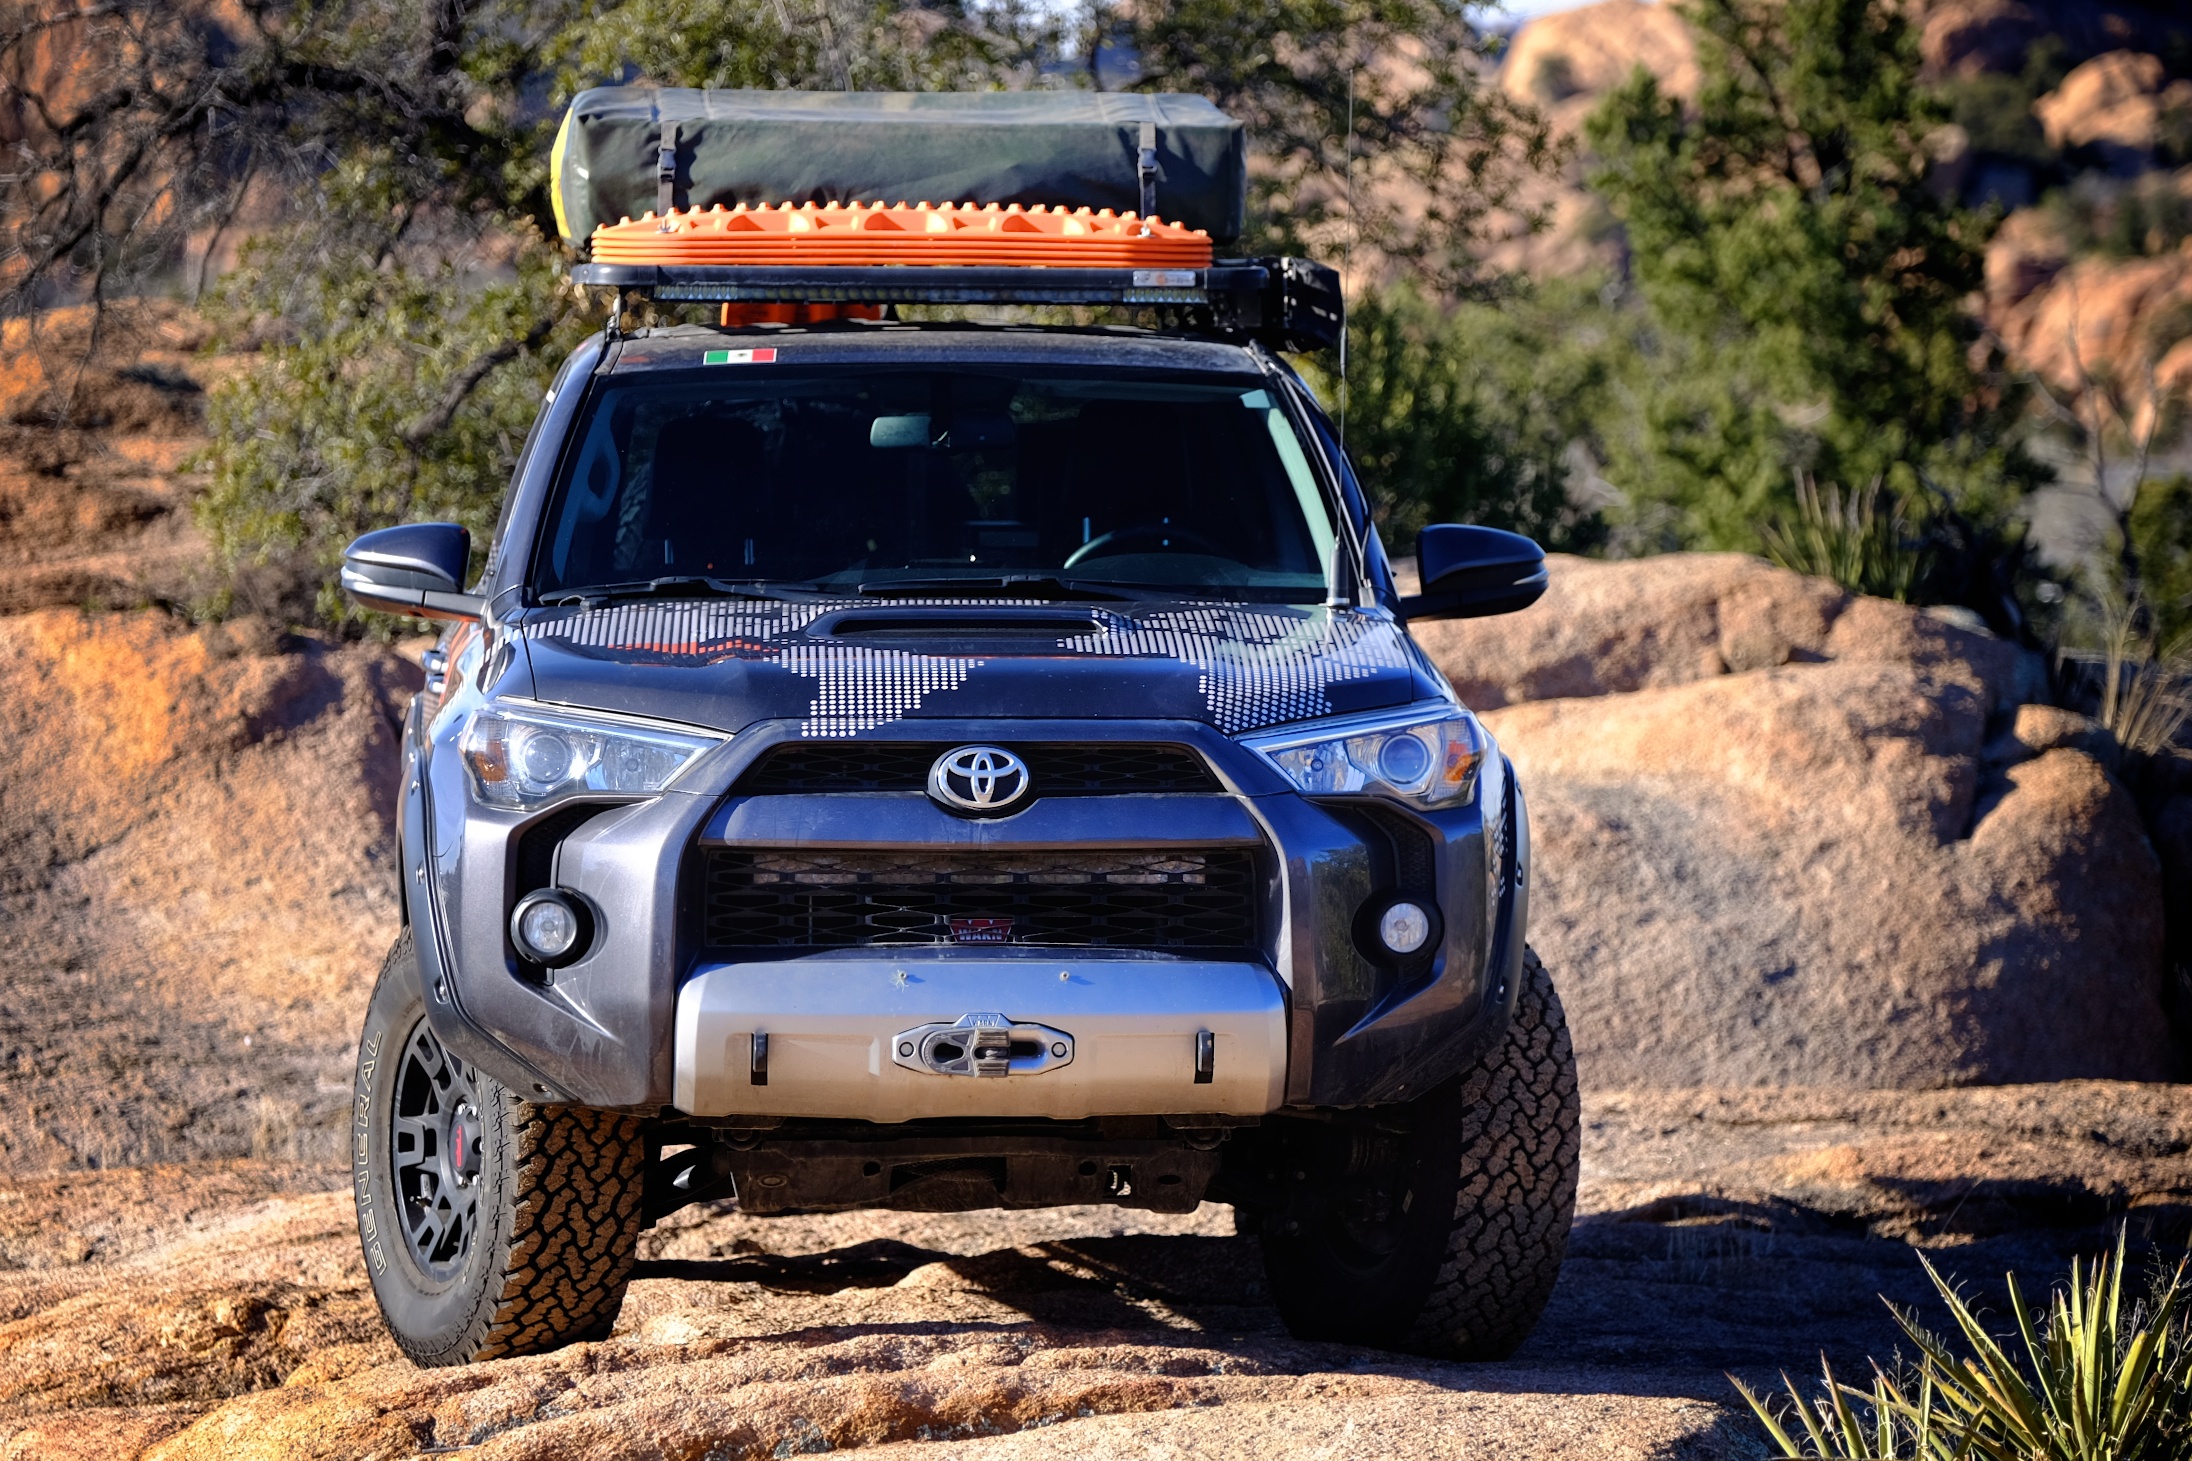 Mad runner expedition. Toyota 4runner Expedition. Toyota 4runner 2022 Expedition. Toyota 4runner 2018. Toyota 4runner 2015.